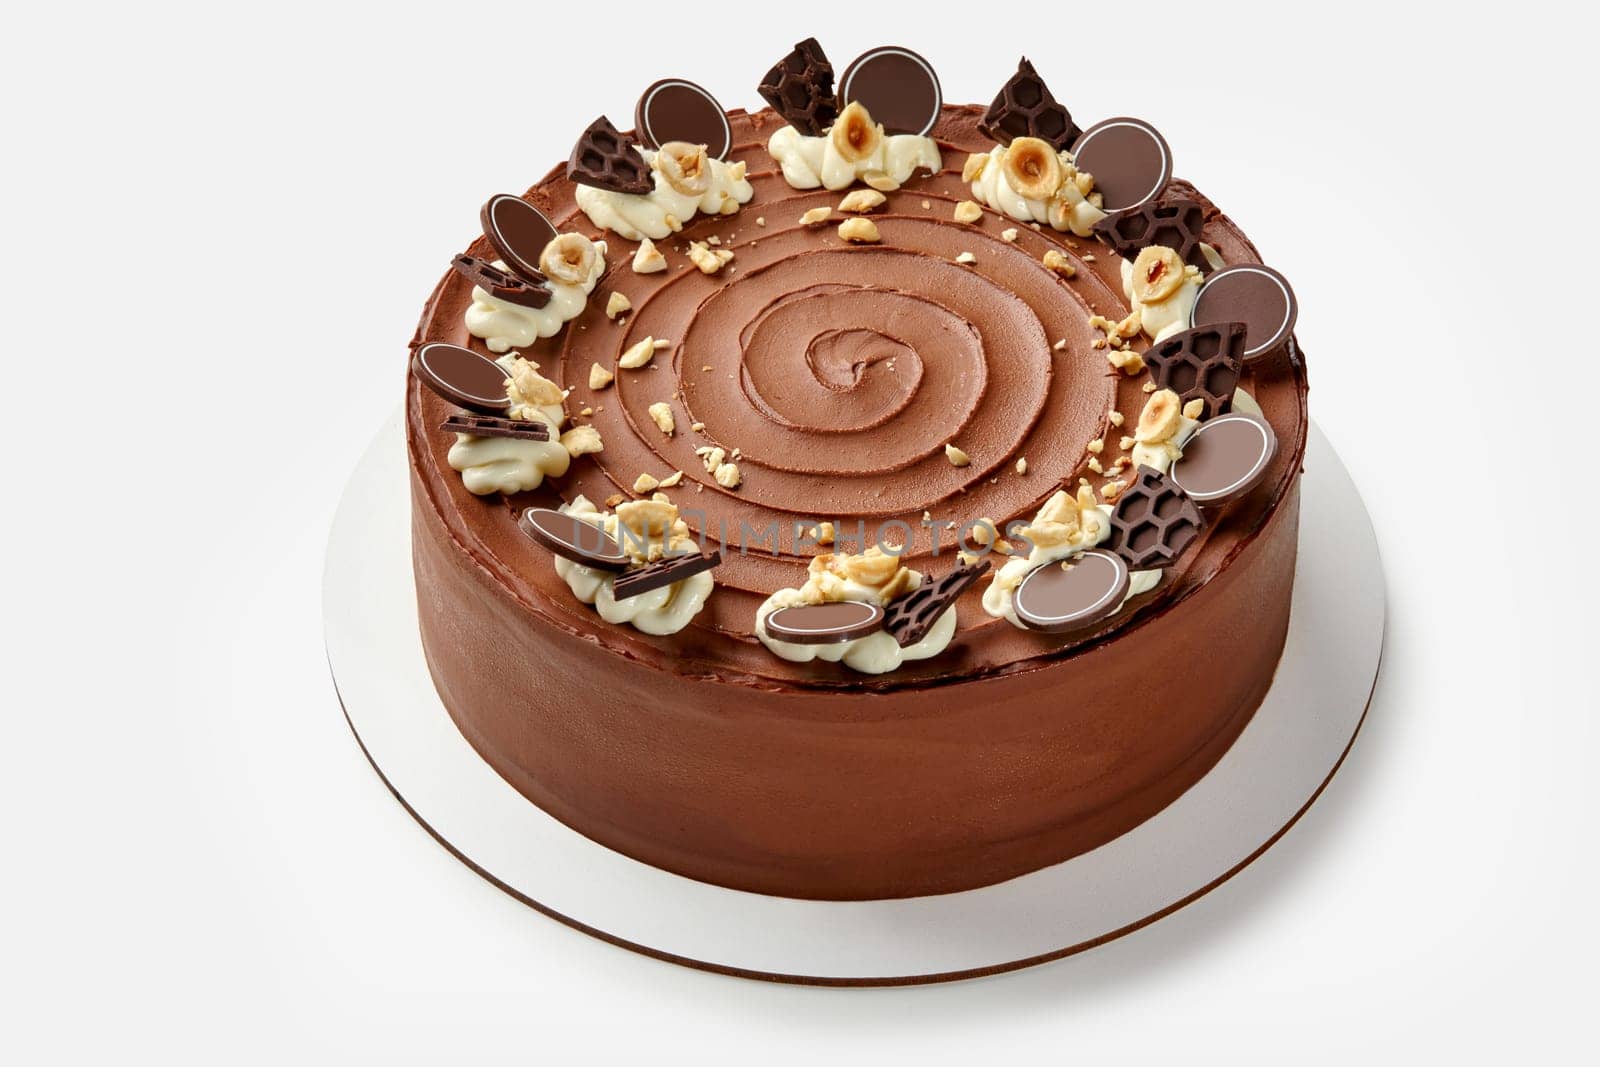 Elegant honey chocolate cake featuring smooth frosting topped with whipped cream swirls, chocolate honeycombs pieces and hazelnuts, presented on white stand